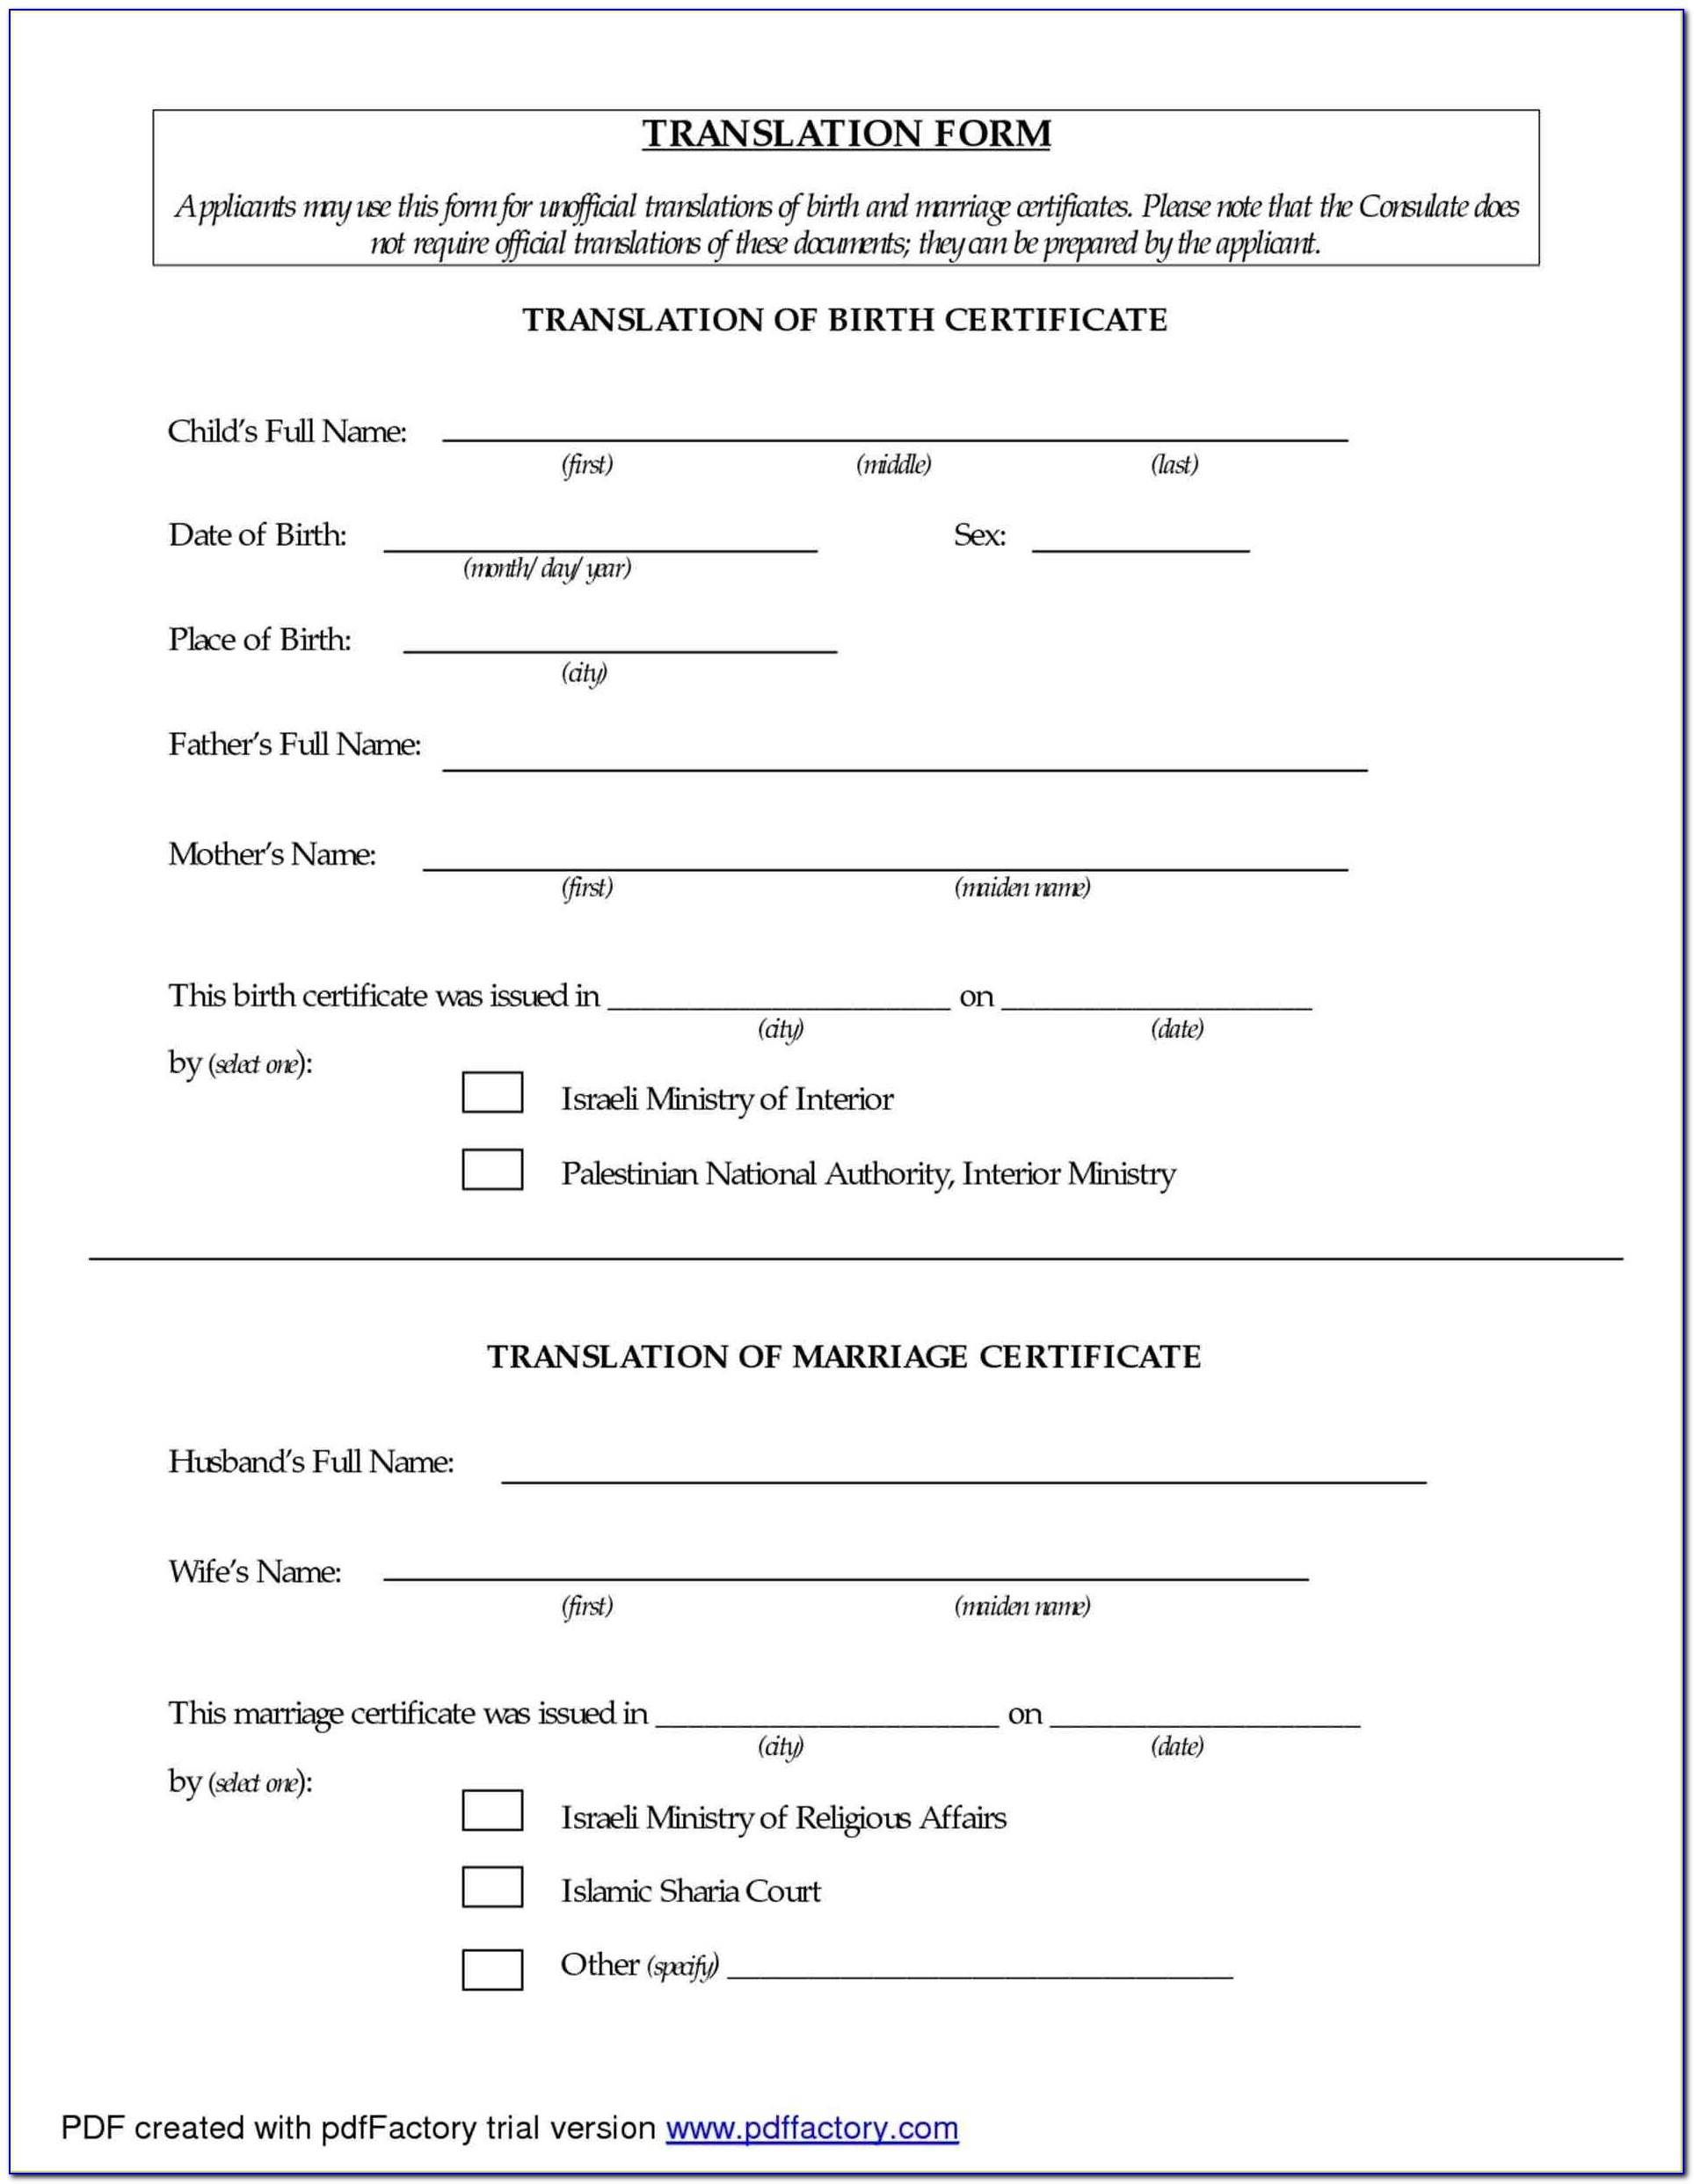 Birth Certificate Translation Form Pdf - Form : Resume With Regard To Mexican Birth Certificate Translation Template